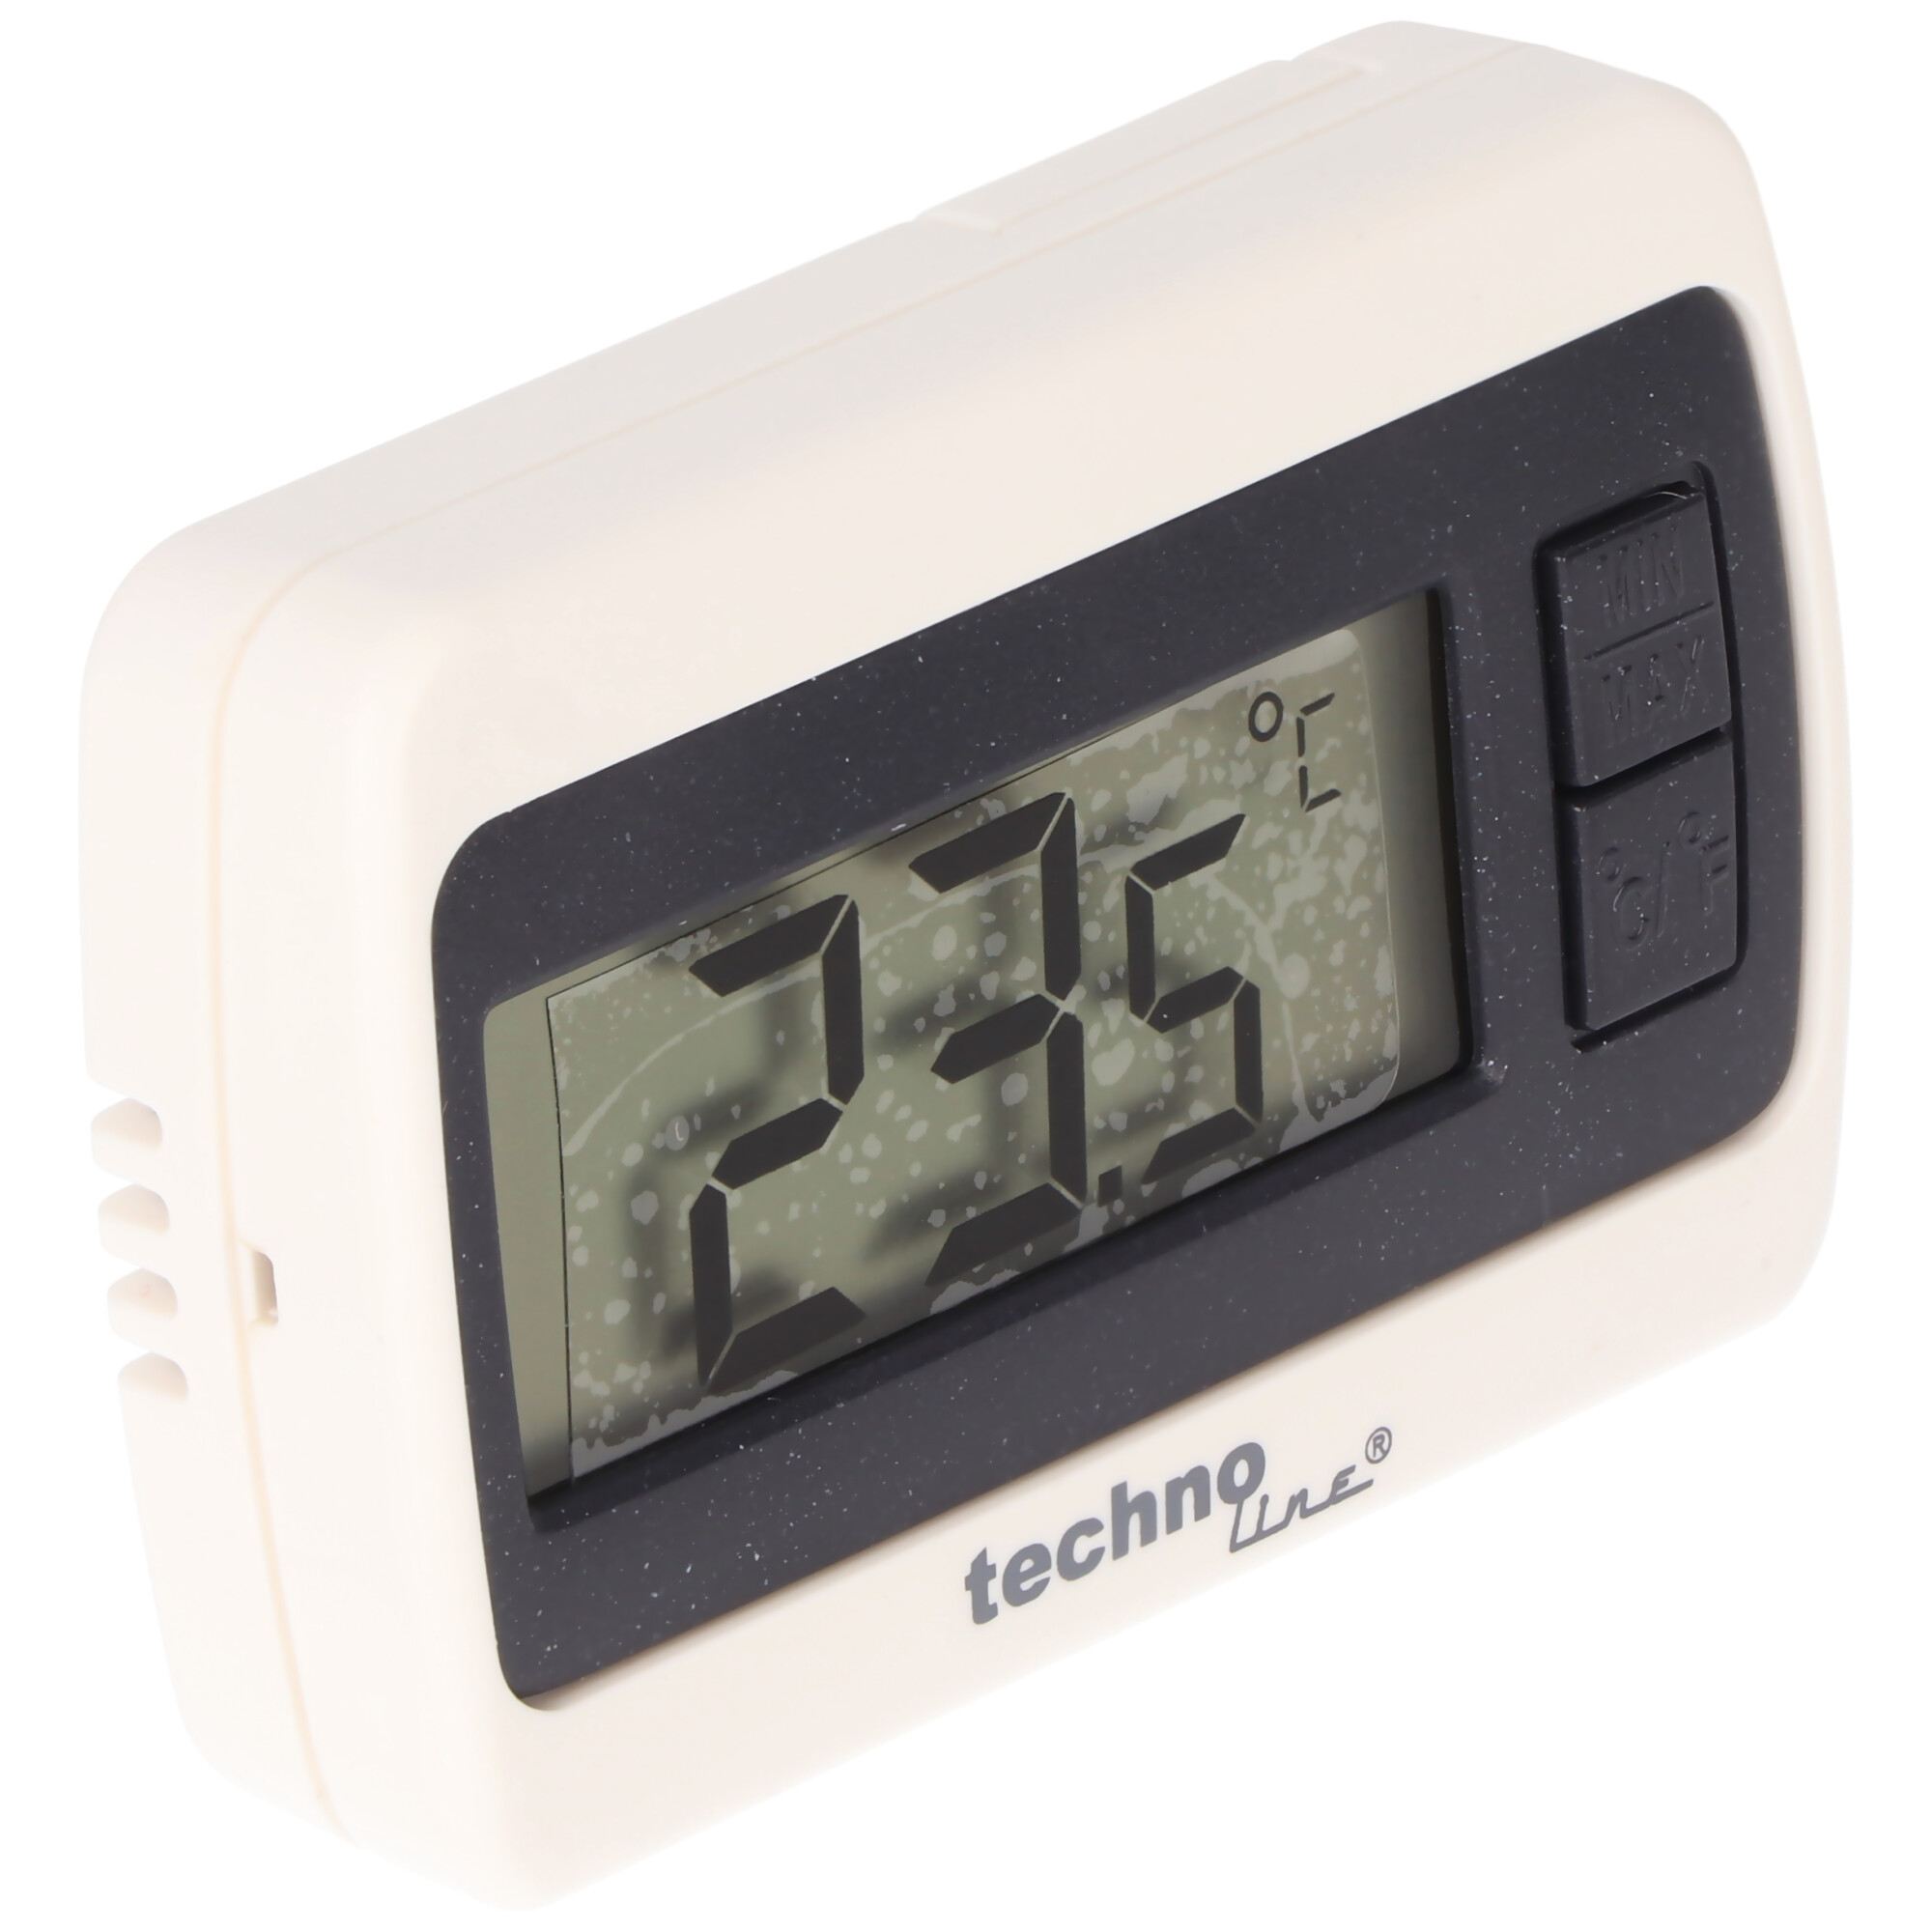 WS 7002 - Thermometer